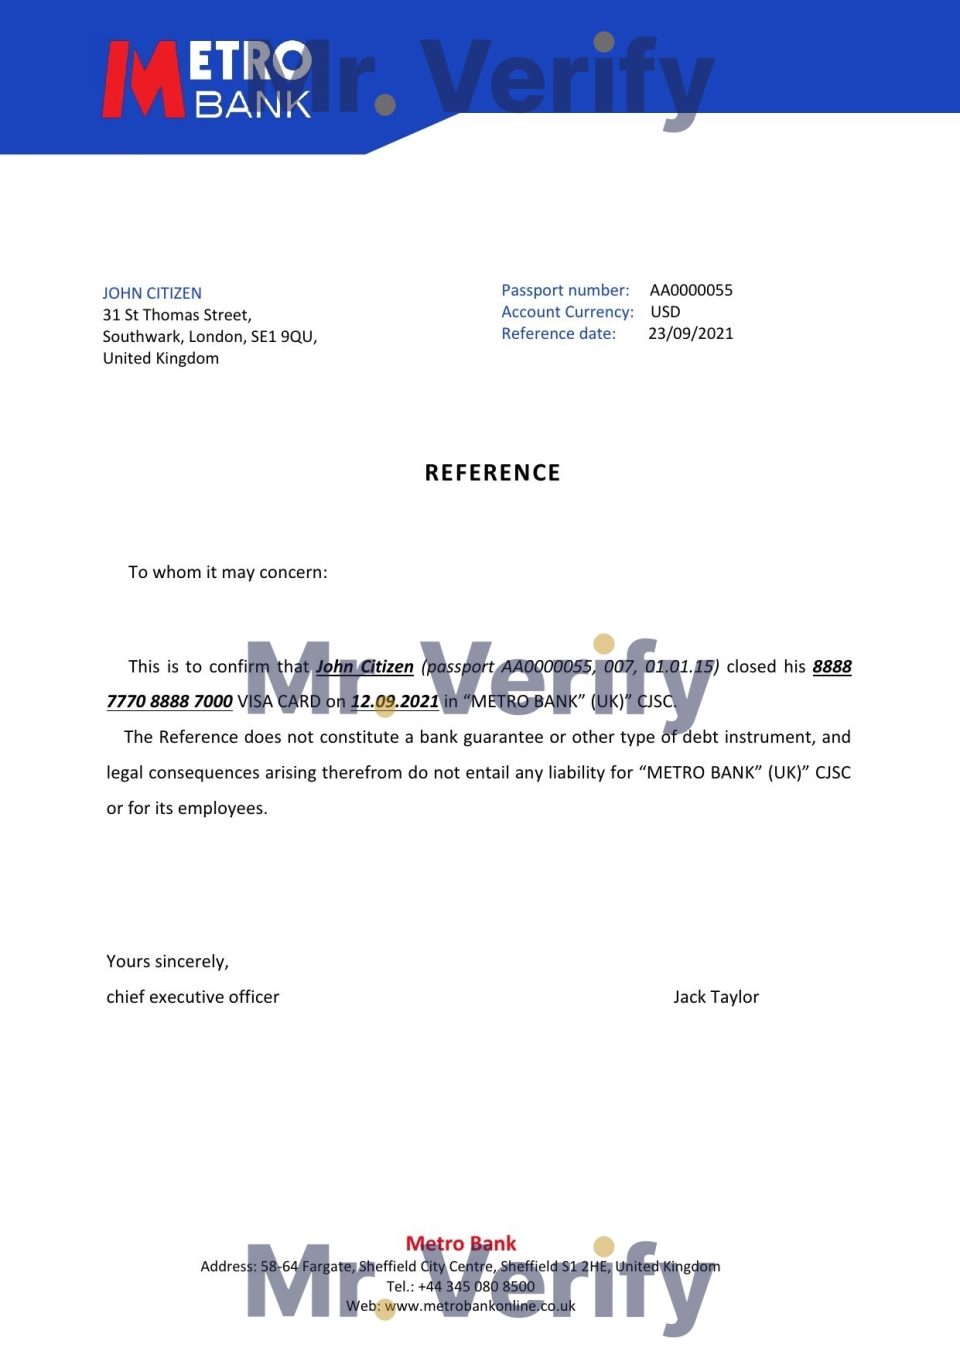 Download United Kingdom Metro Bank Reference Letter Templates | Editable Word